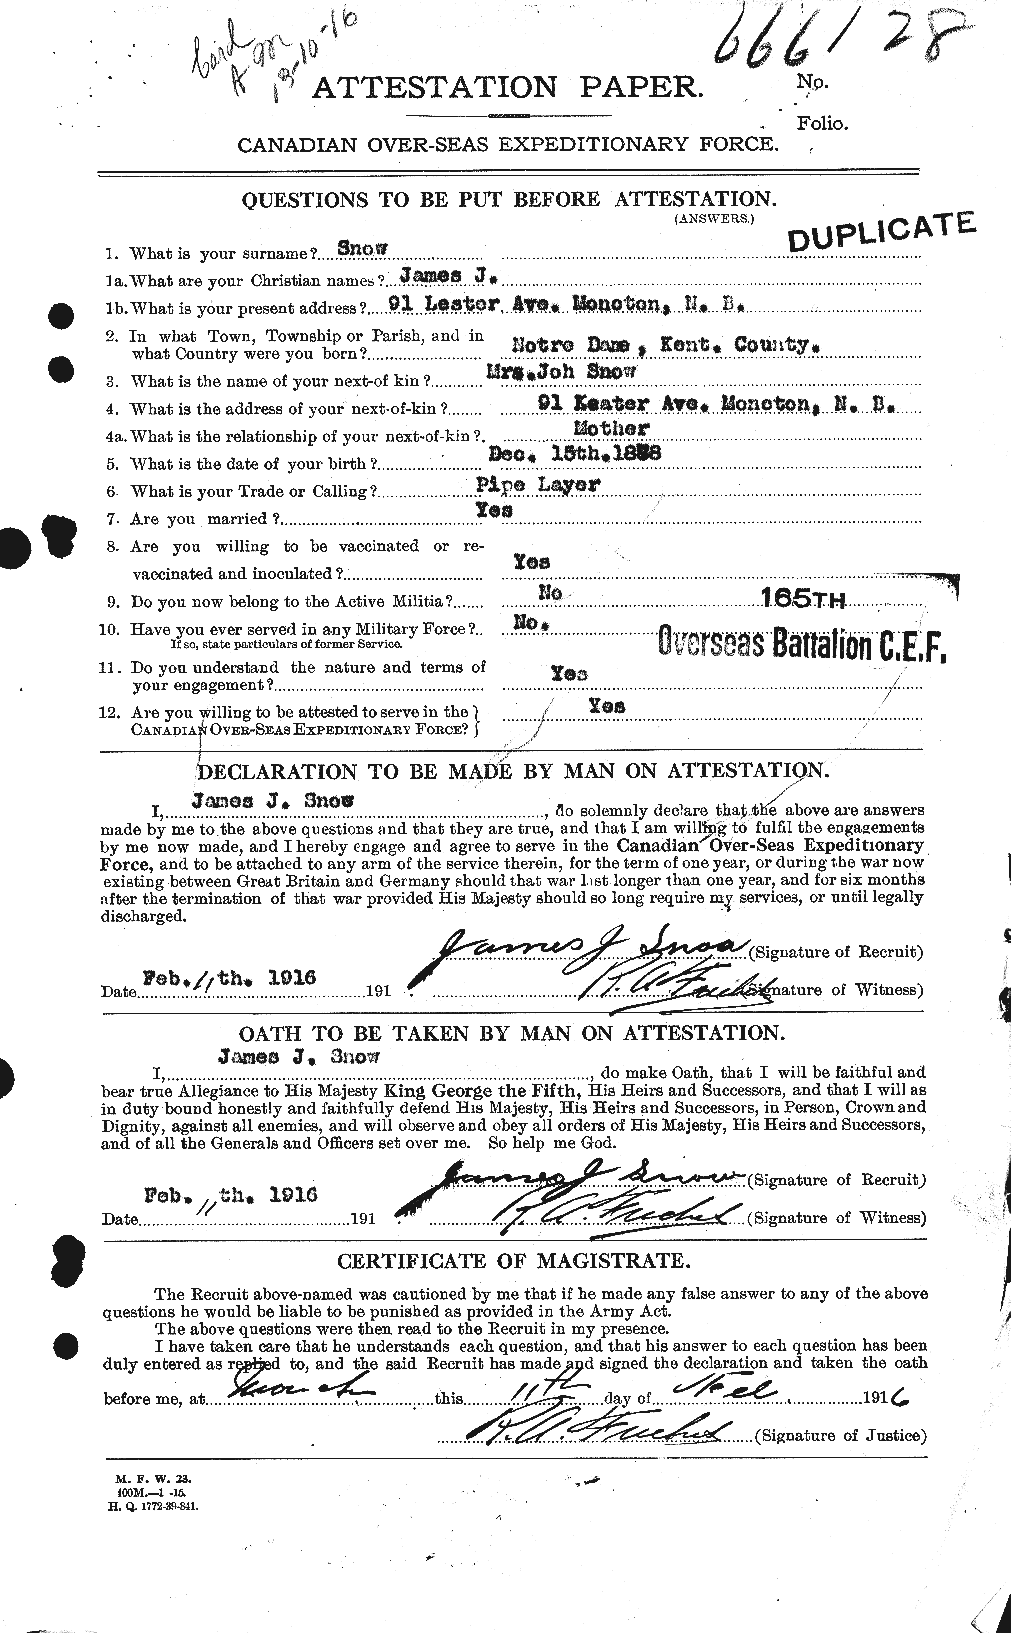 Personnel Records of the First World War - CEF 108951a